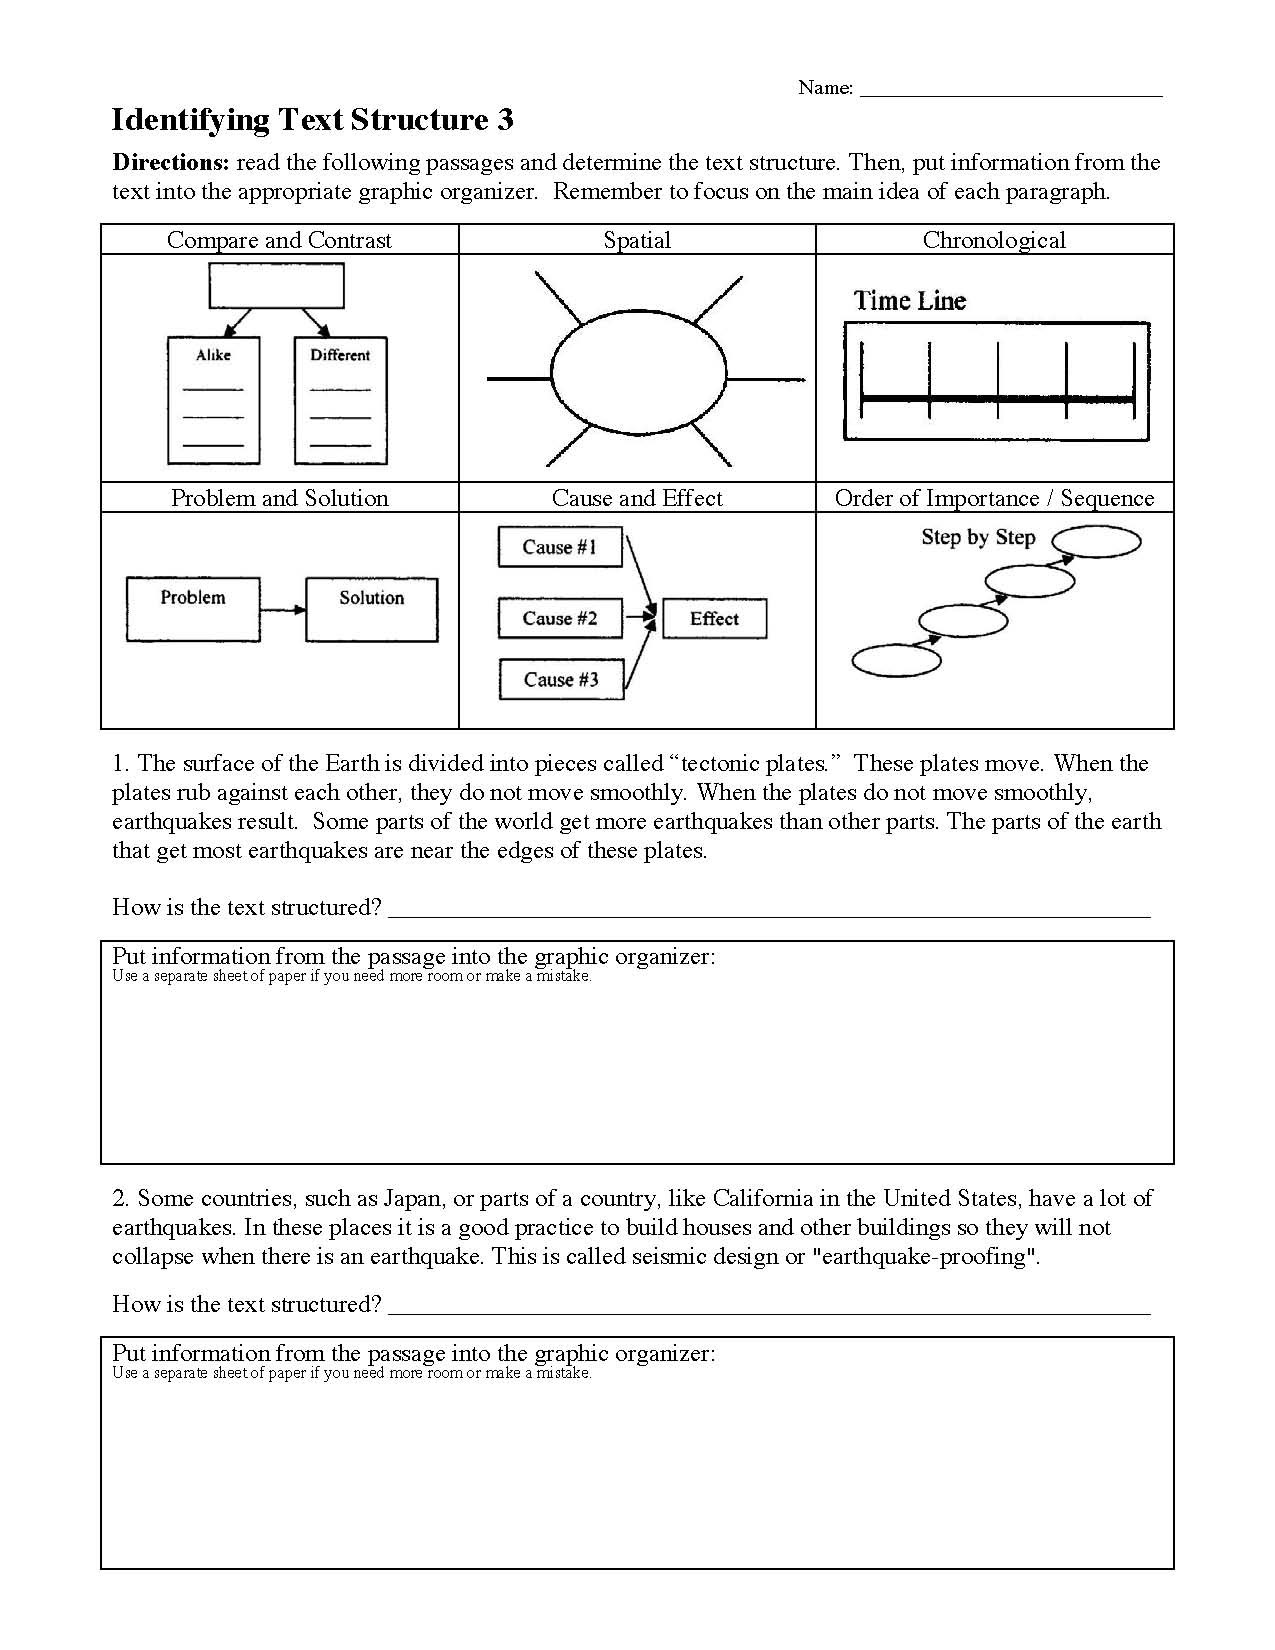 text structure worksheet 03 01